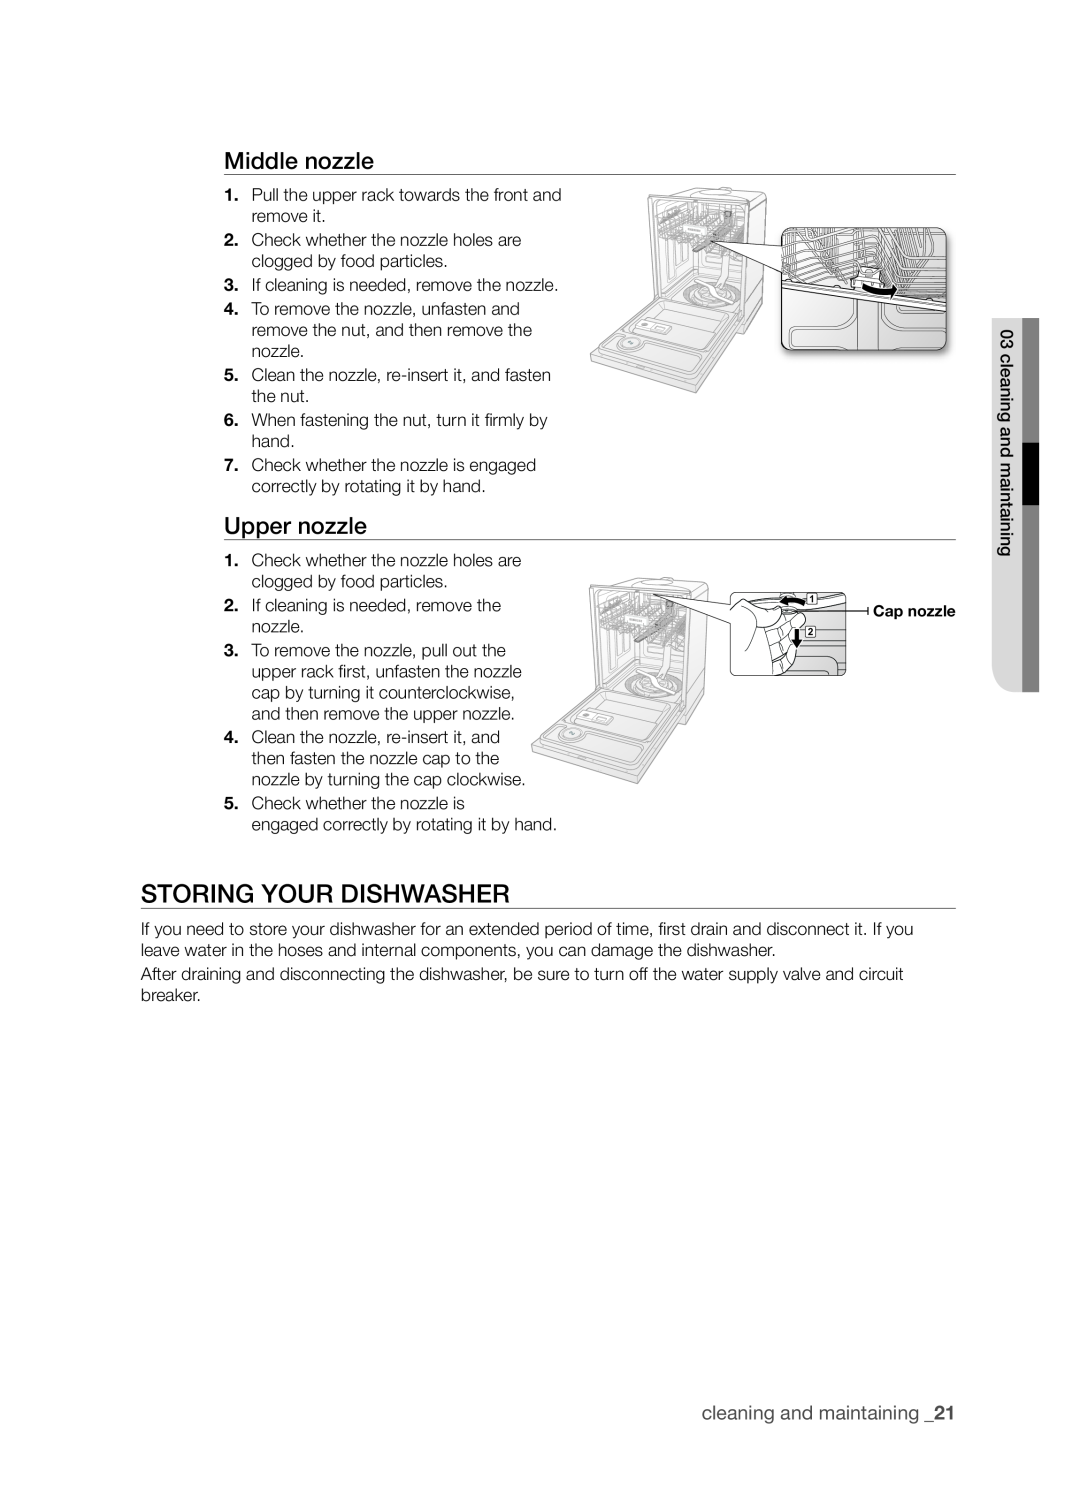 Samsung DMT800RHS, DMT800 Series manual Storing your dishwasher, Middle nozzle, Upper nozzle, cleaning and maintaining 